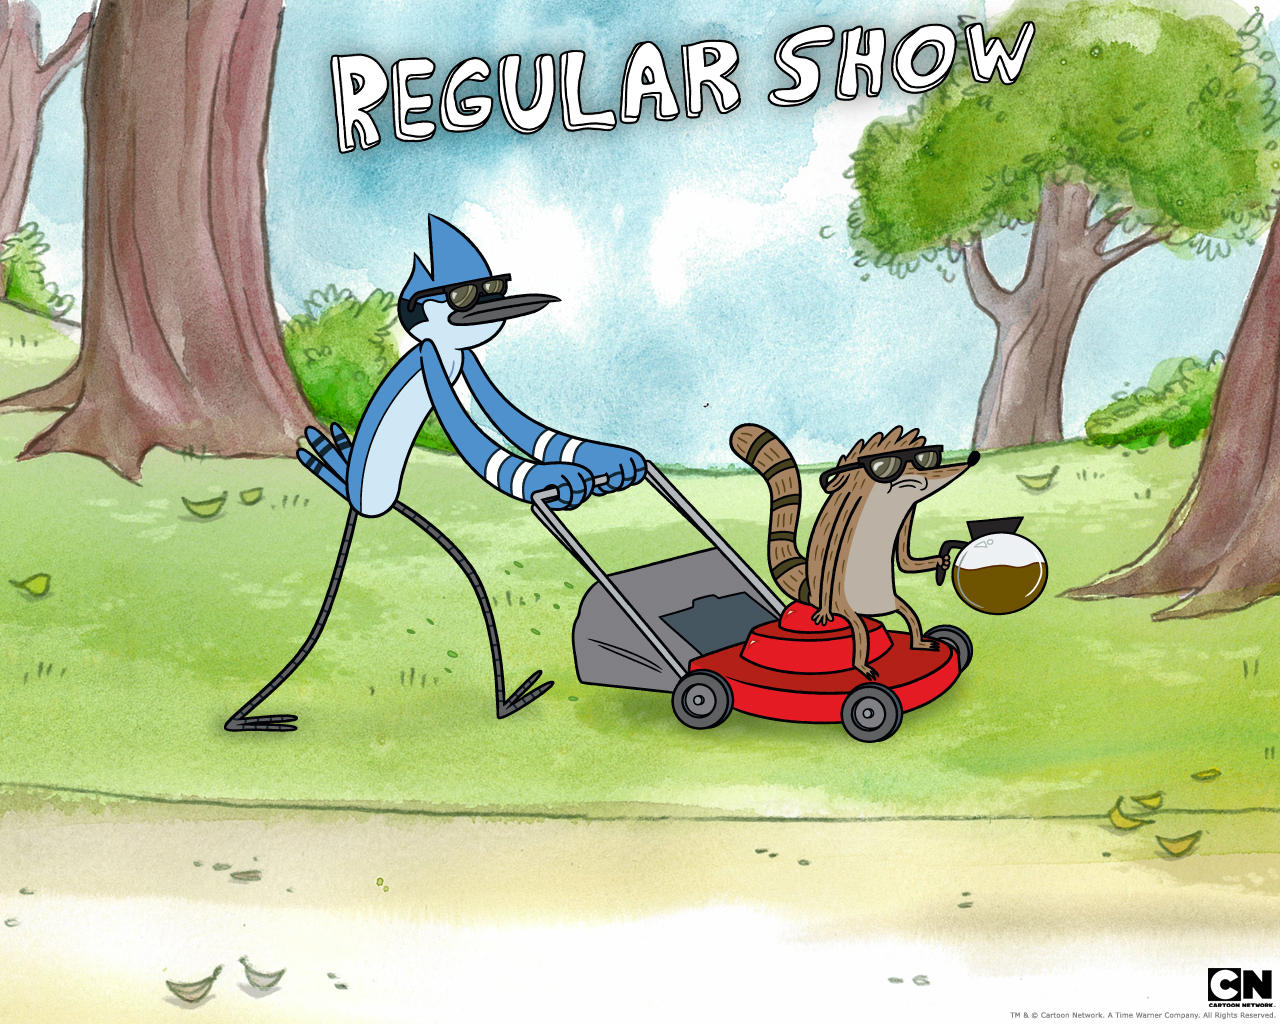 Regular show picture 1280x1024